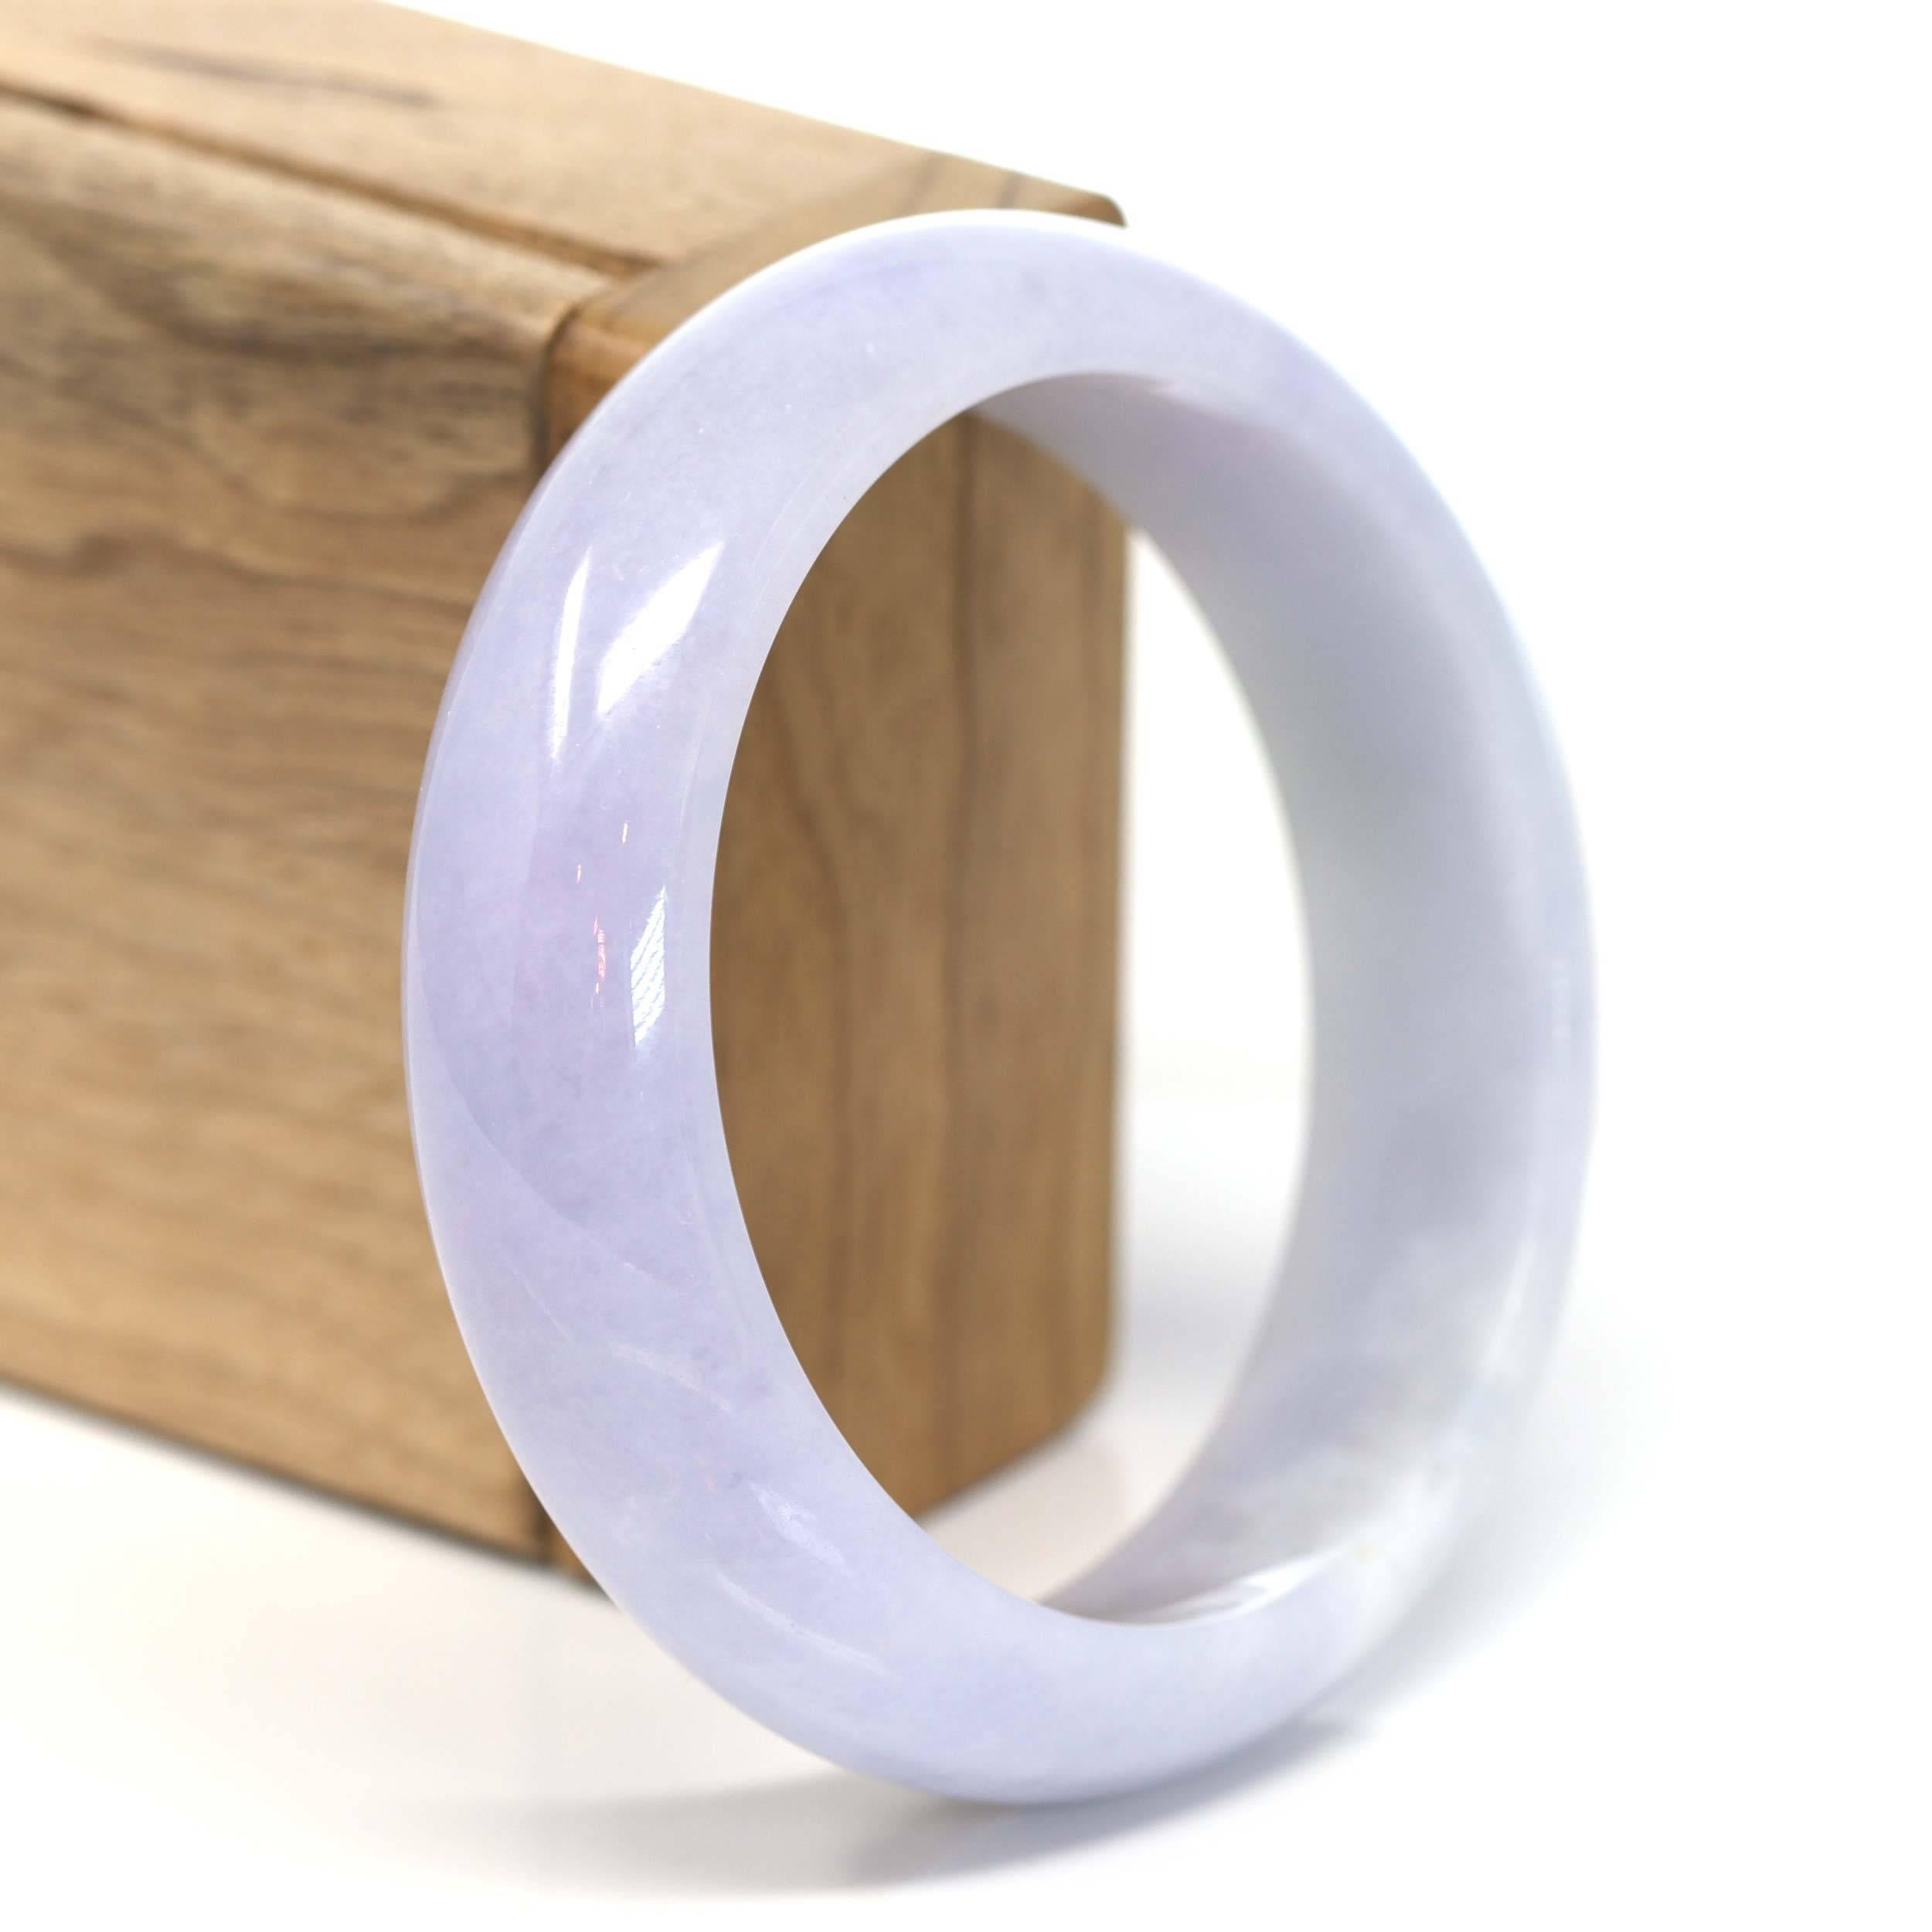 * DETAILS--- Genuine Burmese Lavender Jadeite Jade Bangle Bracelet. This bangle is made with high-quality genuine Burmese Lavender Jadeite jade, The jade texture is semi translucent with lavender colors. The lavender color is truly mesmerizing. The